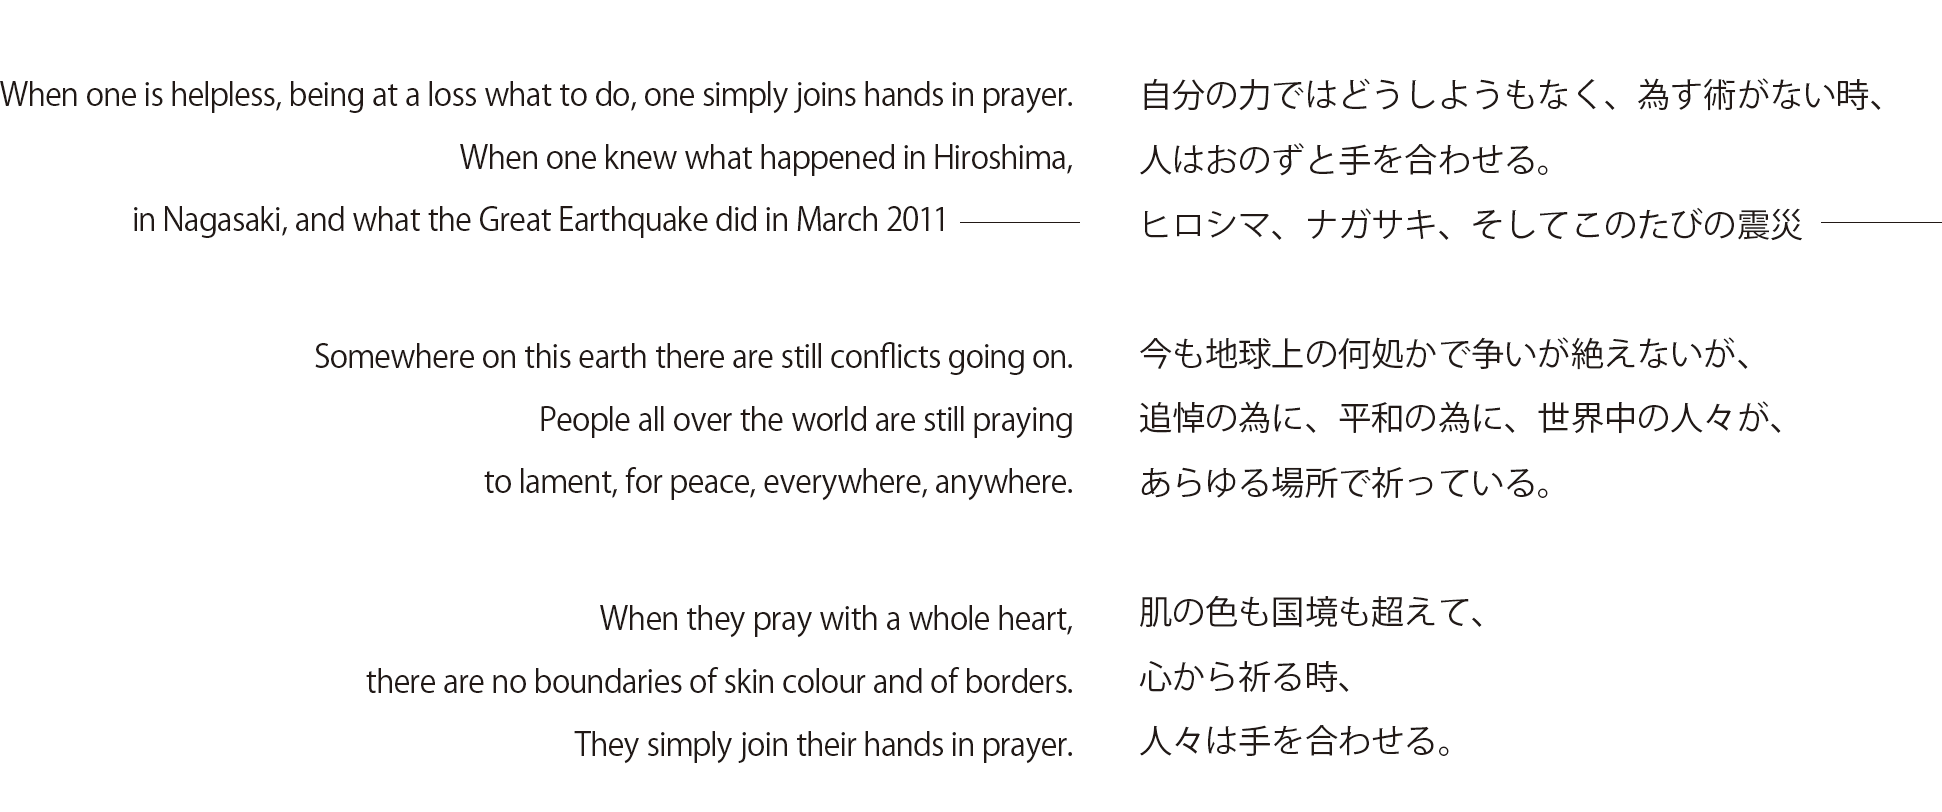 When one is helpless, being at a loss what to do, one simply joins hands in prayer. When one knew what happened in Hiroshima, in Nagasaki, and what the Great Earthquake did in March 2011 Somewhere on this earth there are still conflicts going on. People all over the world are still praying to lament, for peace, everywhere, anywhere. When they pray with a whole heart, there are no boundaries of skin colour and of borders. They simply join their hands in prayer. 